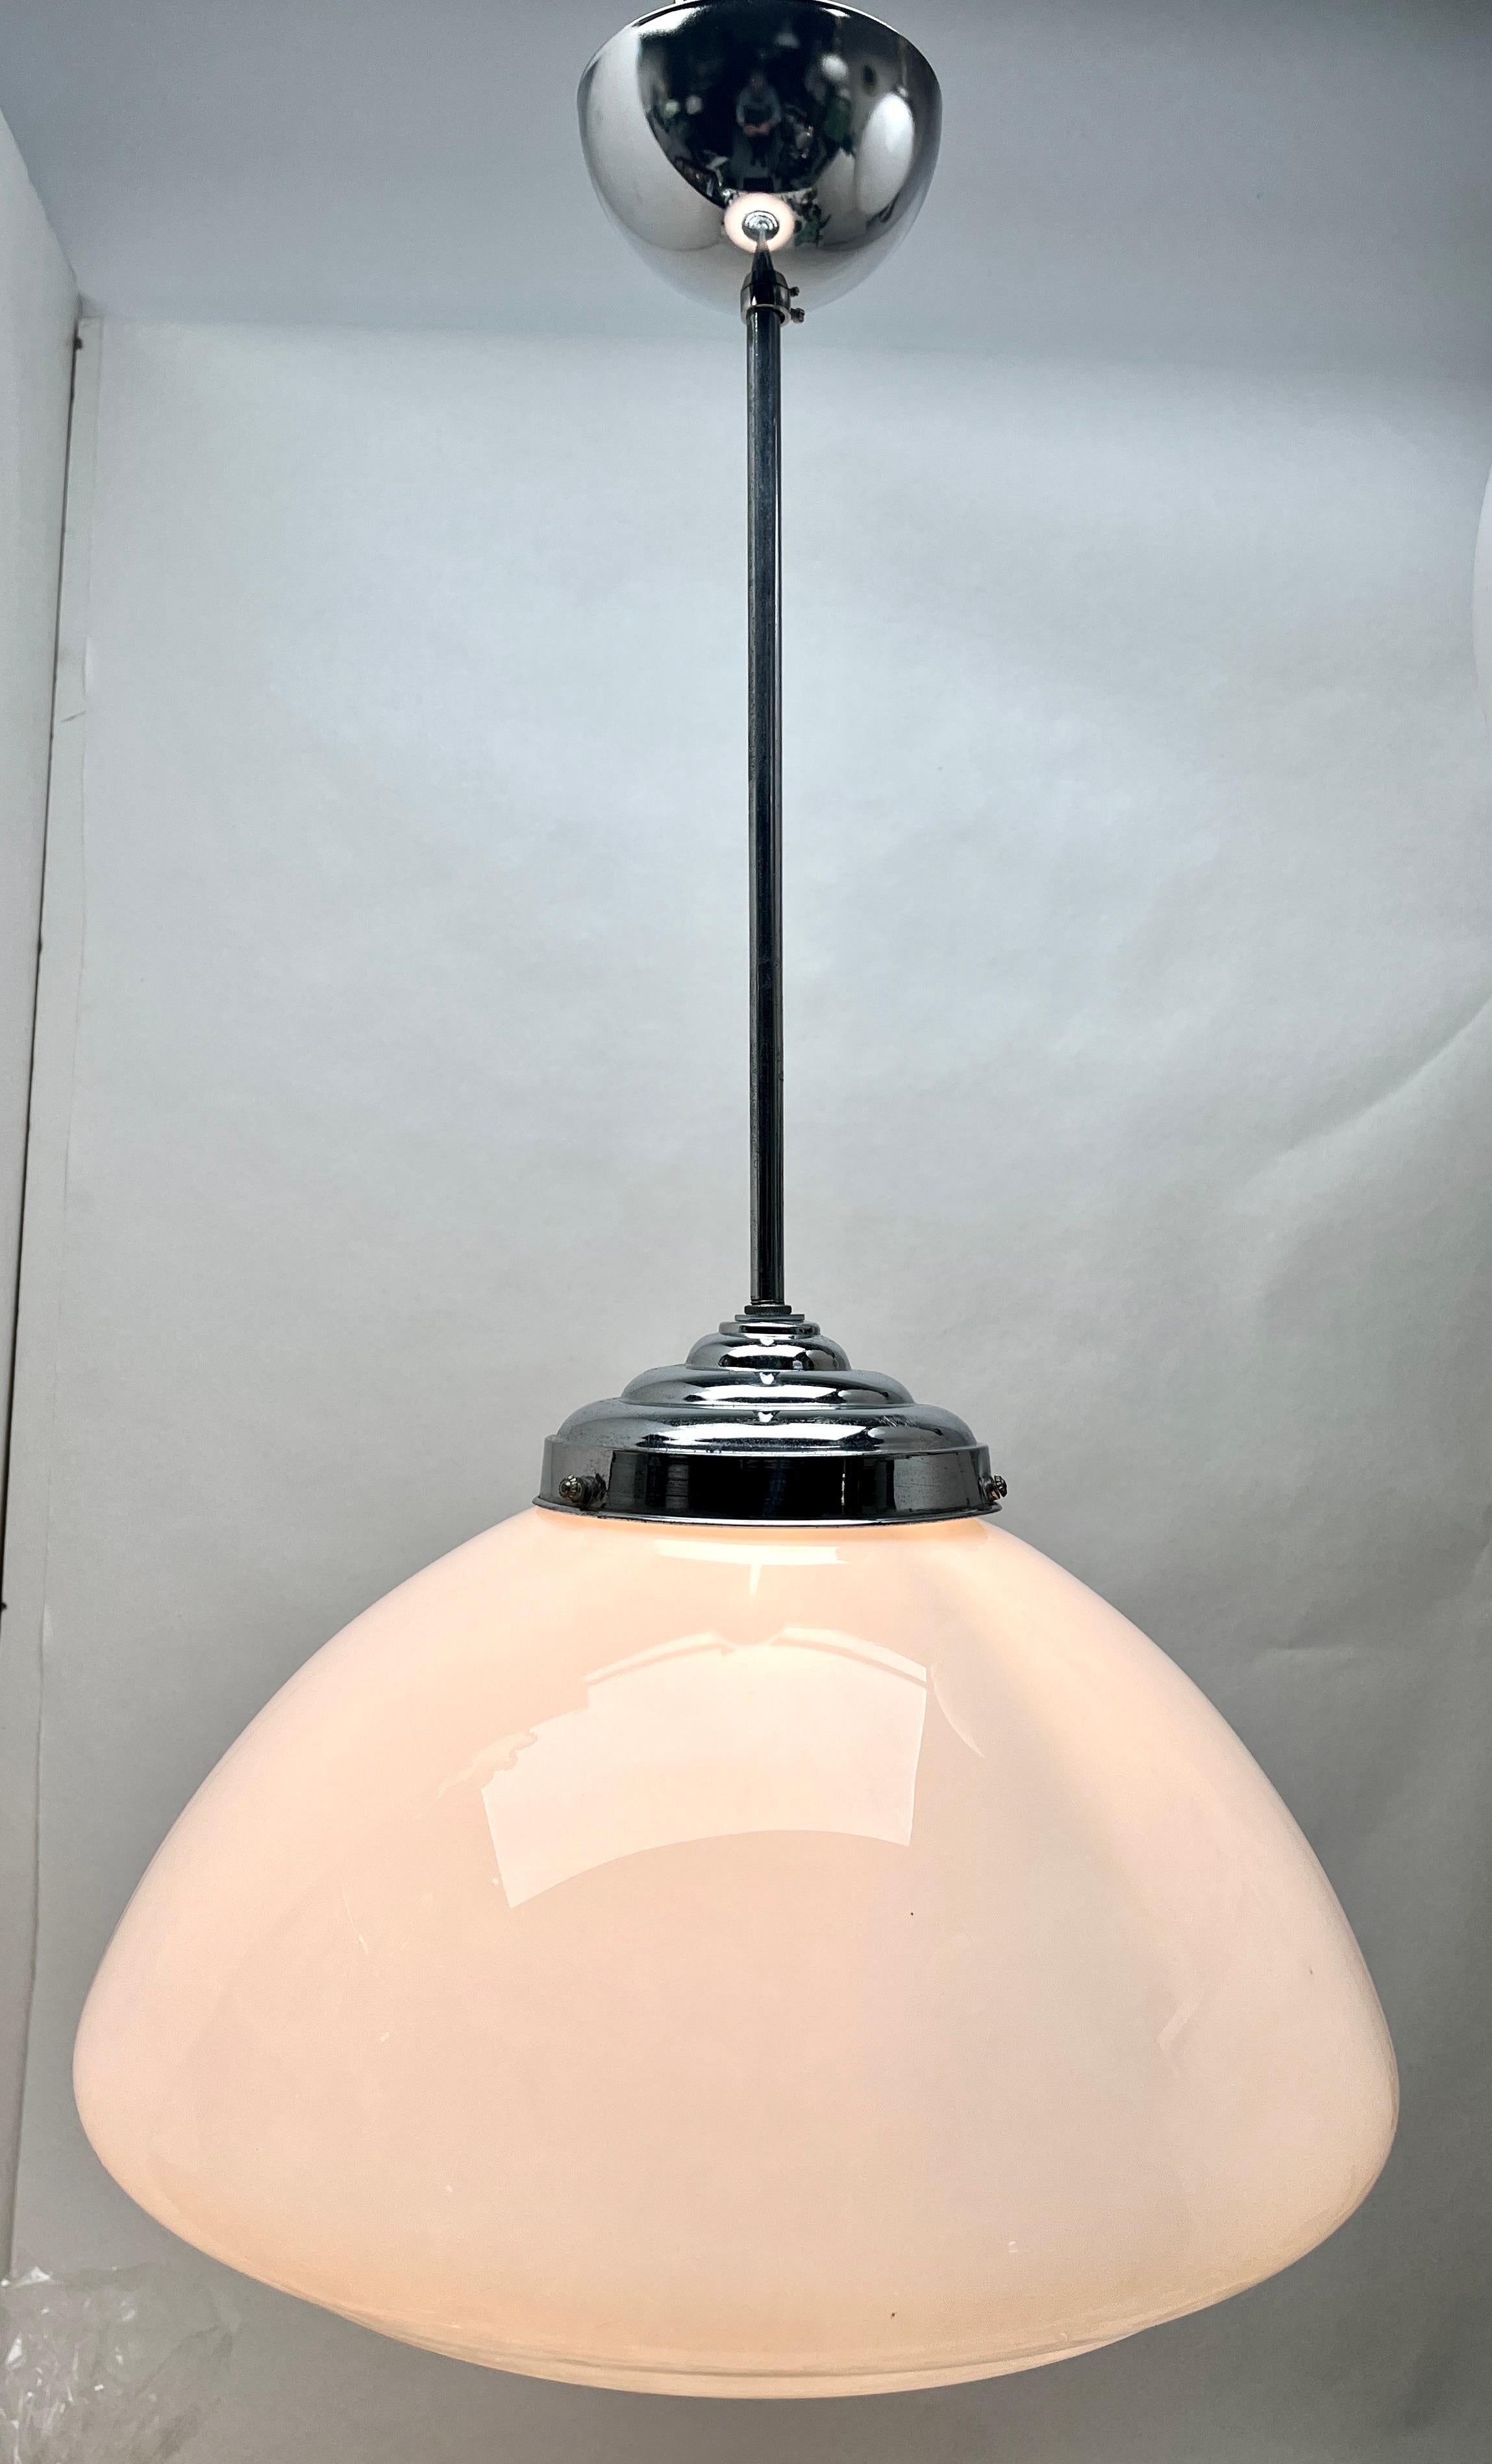 Phillips Pendant Stem Lamp with a Globular Opaline Shade, 1930s, Netherlands For Sale 2